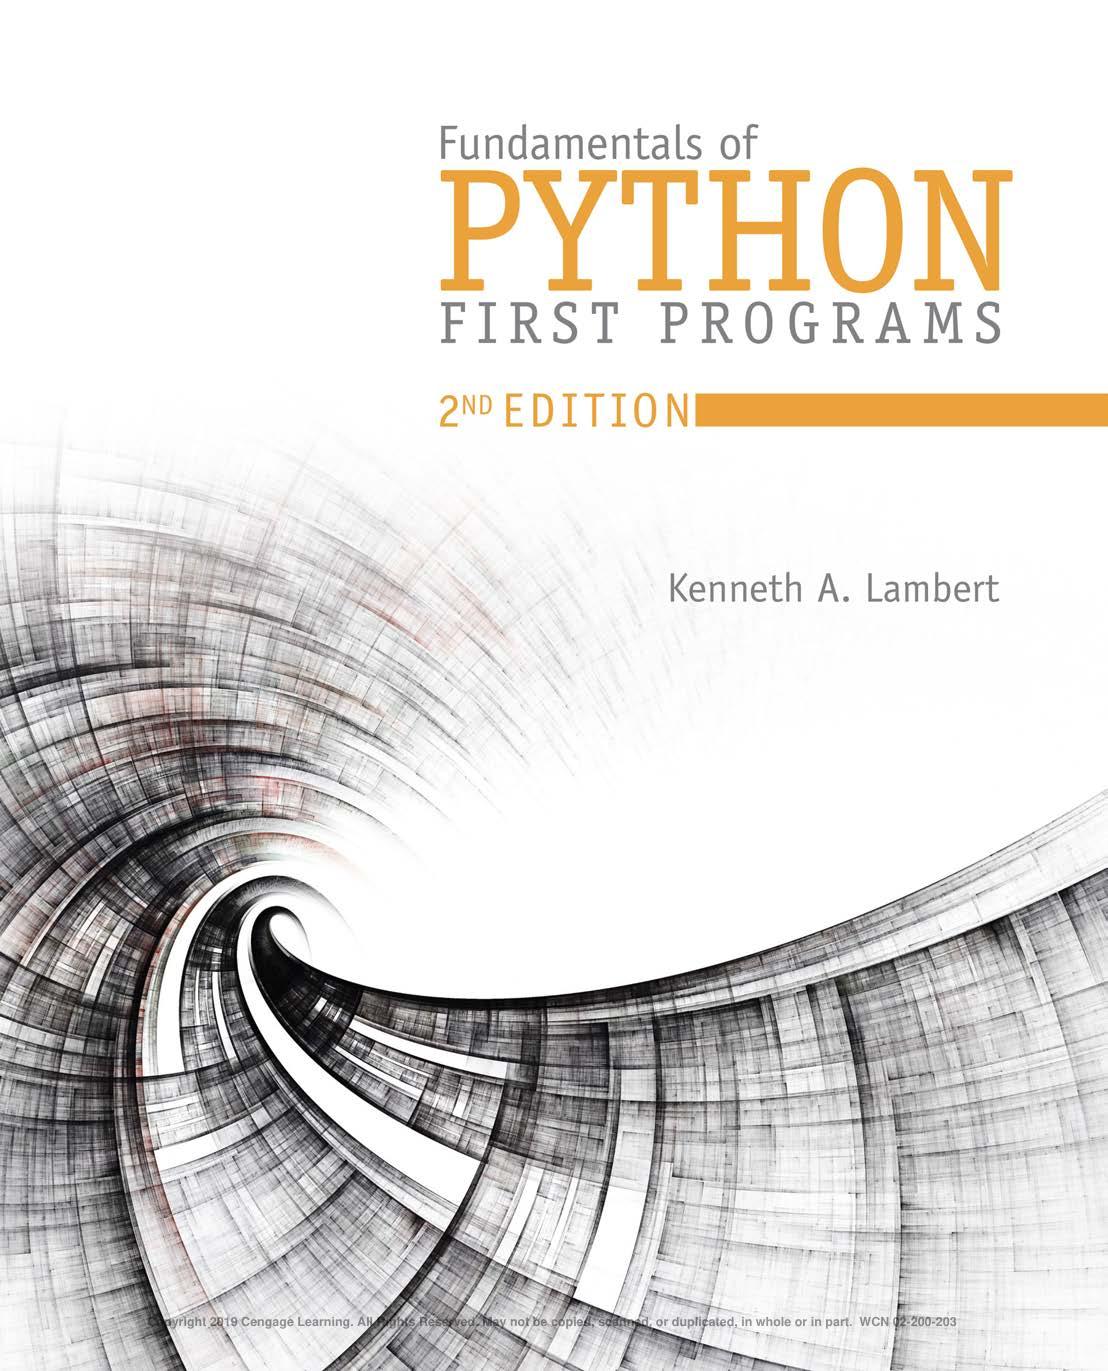 Fundamentals of Python: First Programs, 2nd ed.